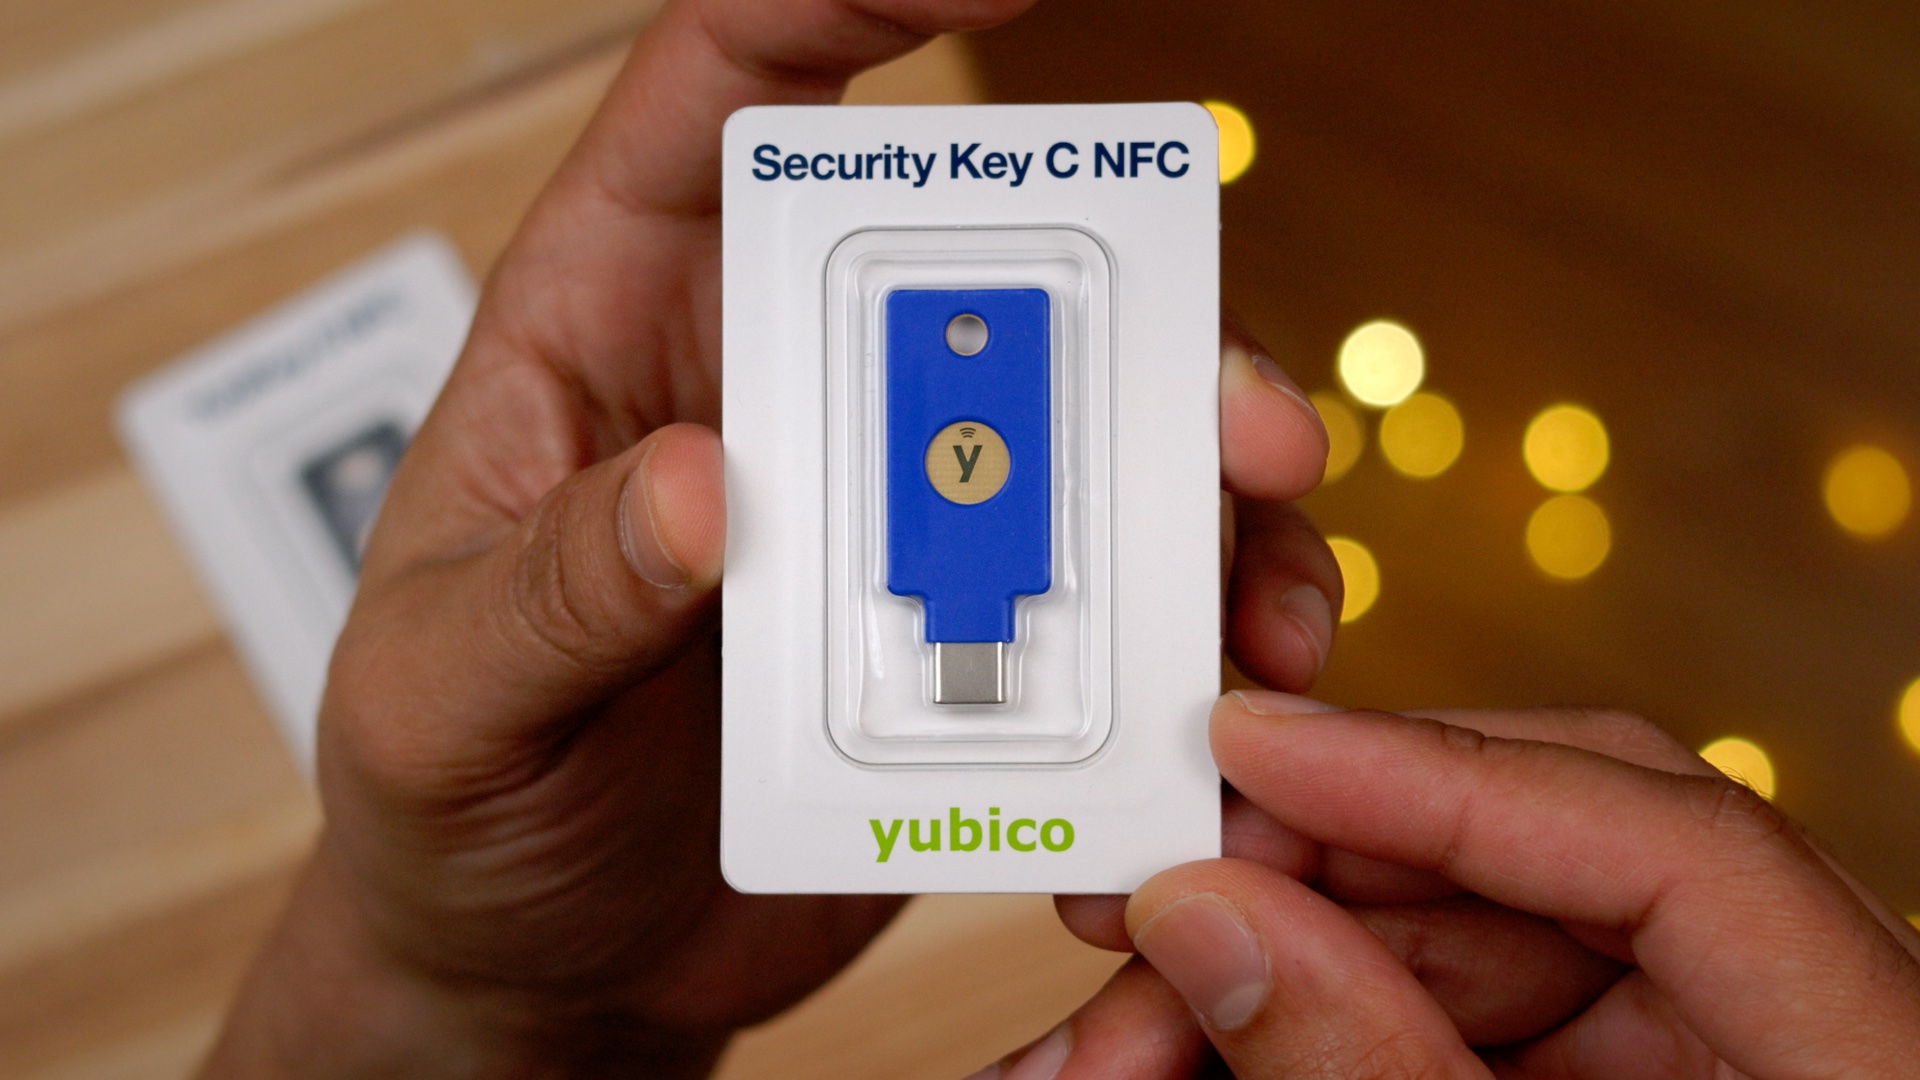 A close up of the packaging of the Yubico Security Key C NFC.